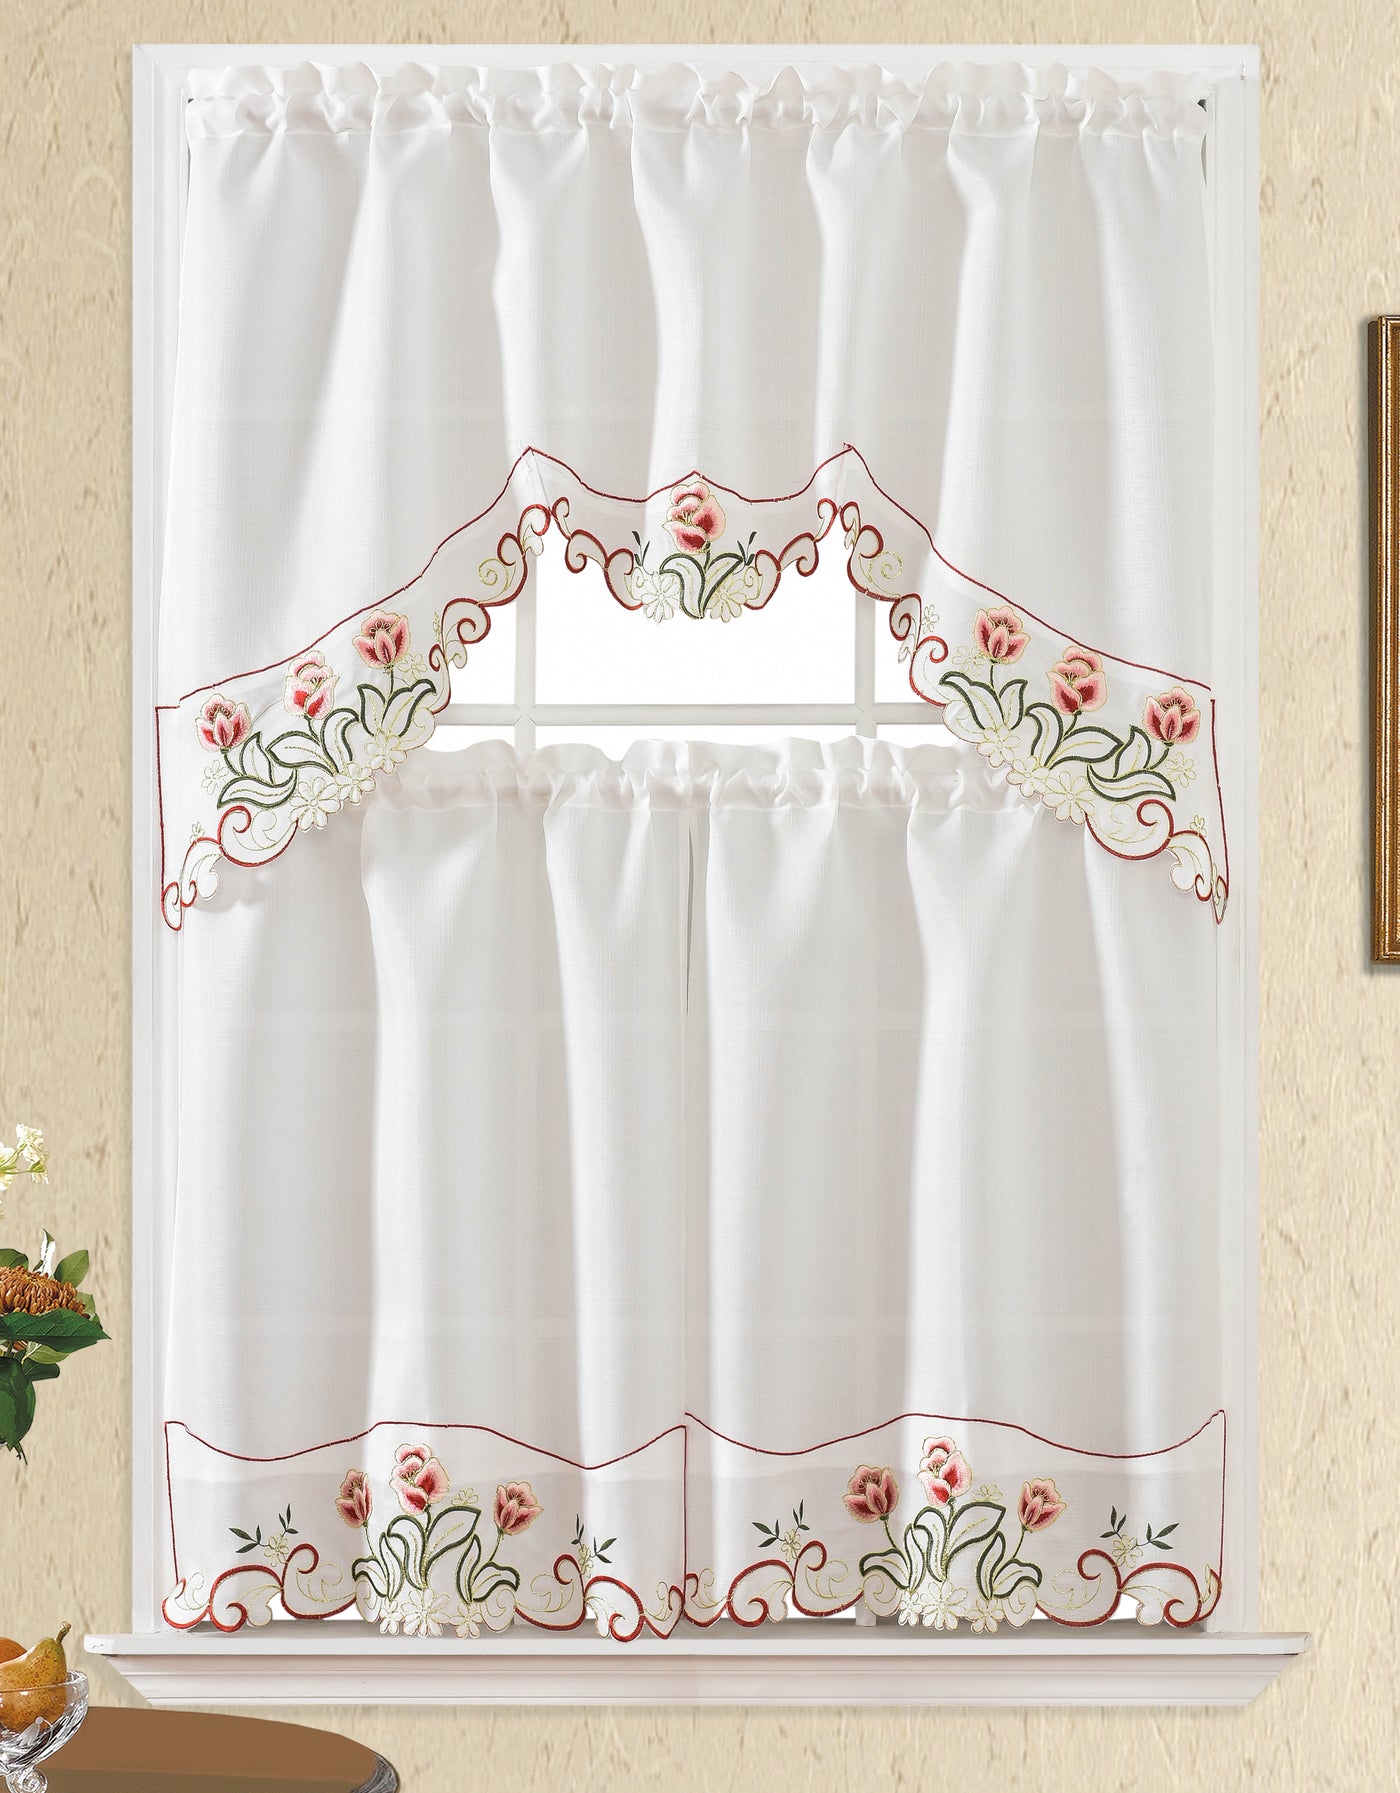 3pc Embroidered Rod Pocket Kitchen Curtain Light Filtering Tier and Valance | Jenin Home Furnishing.